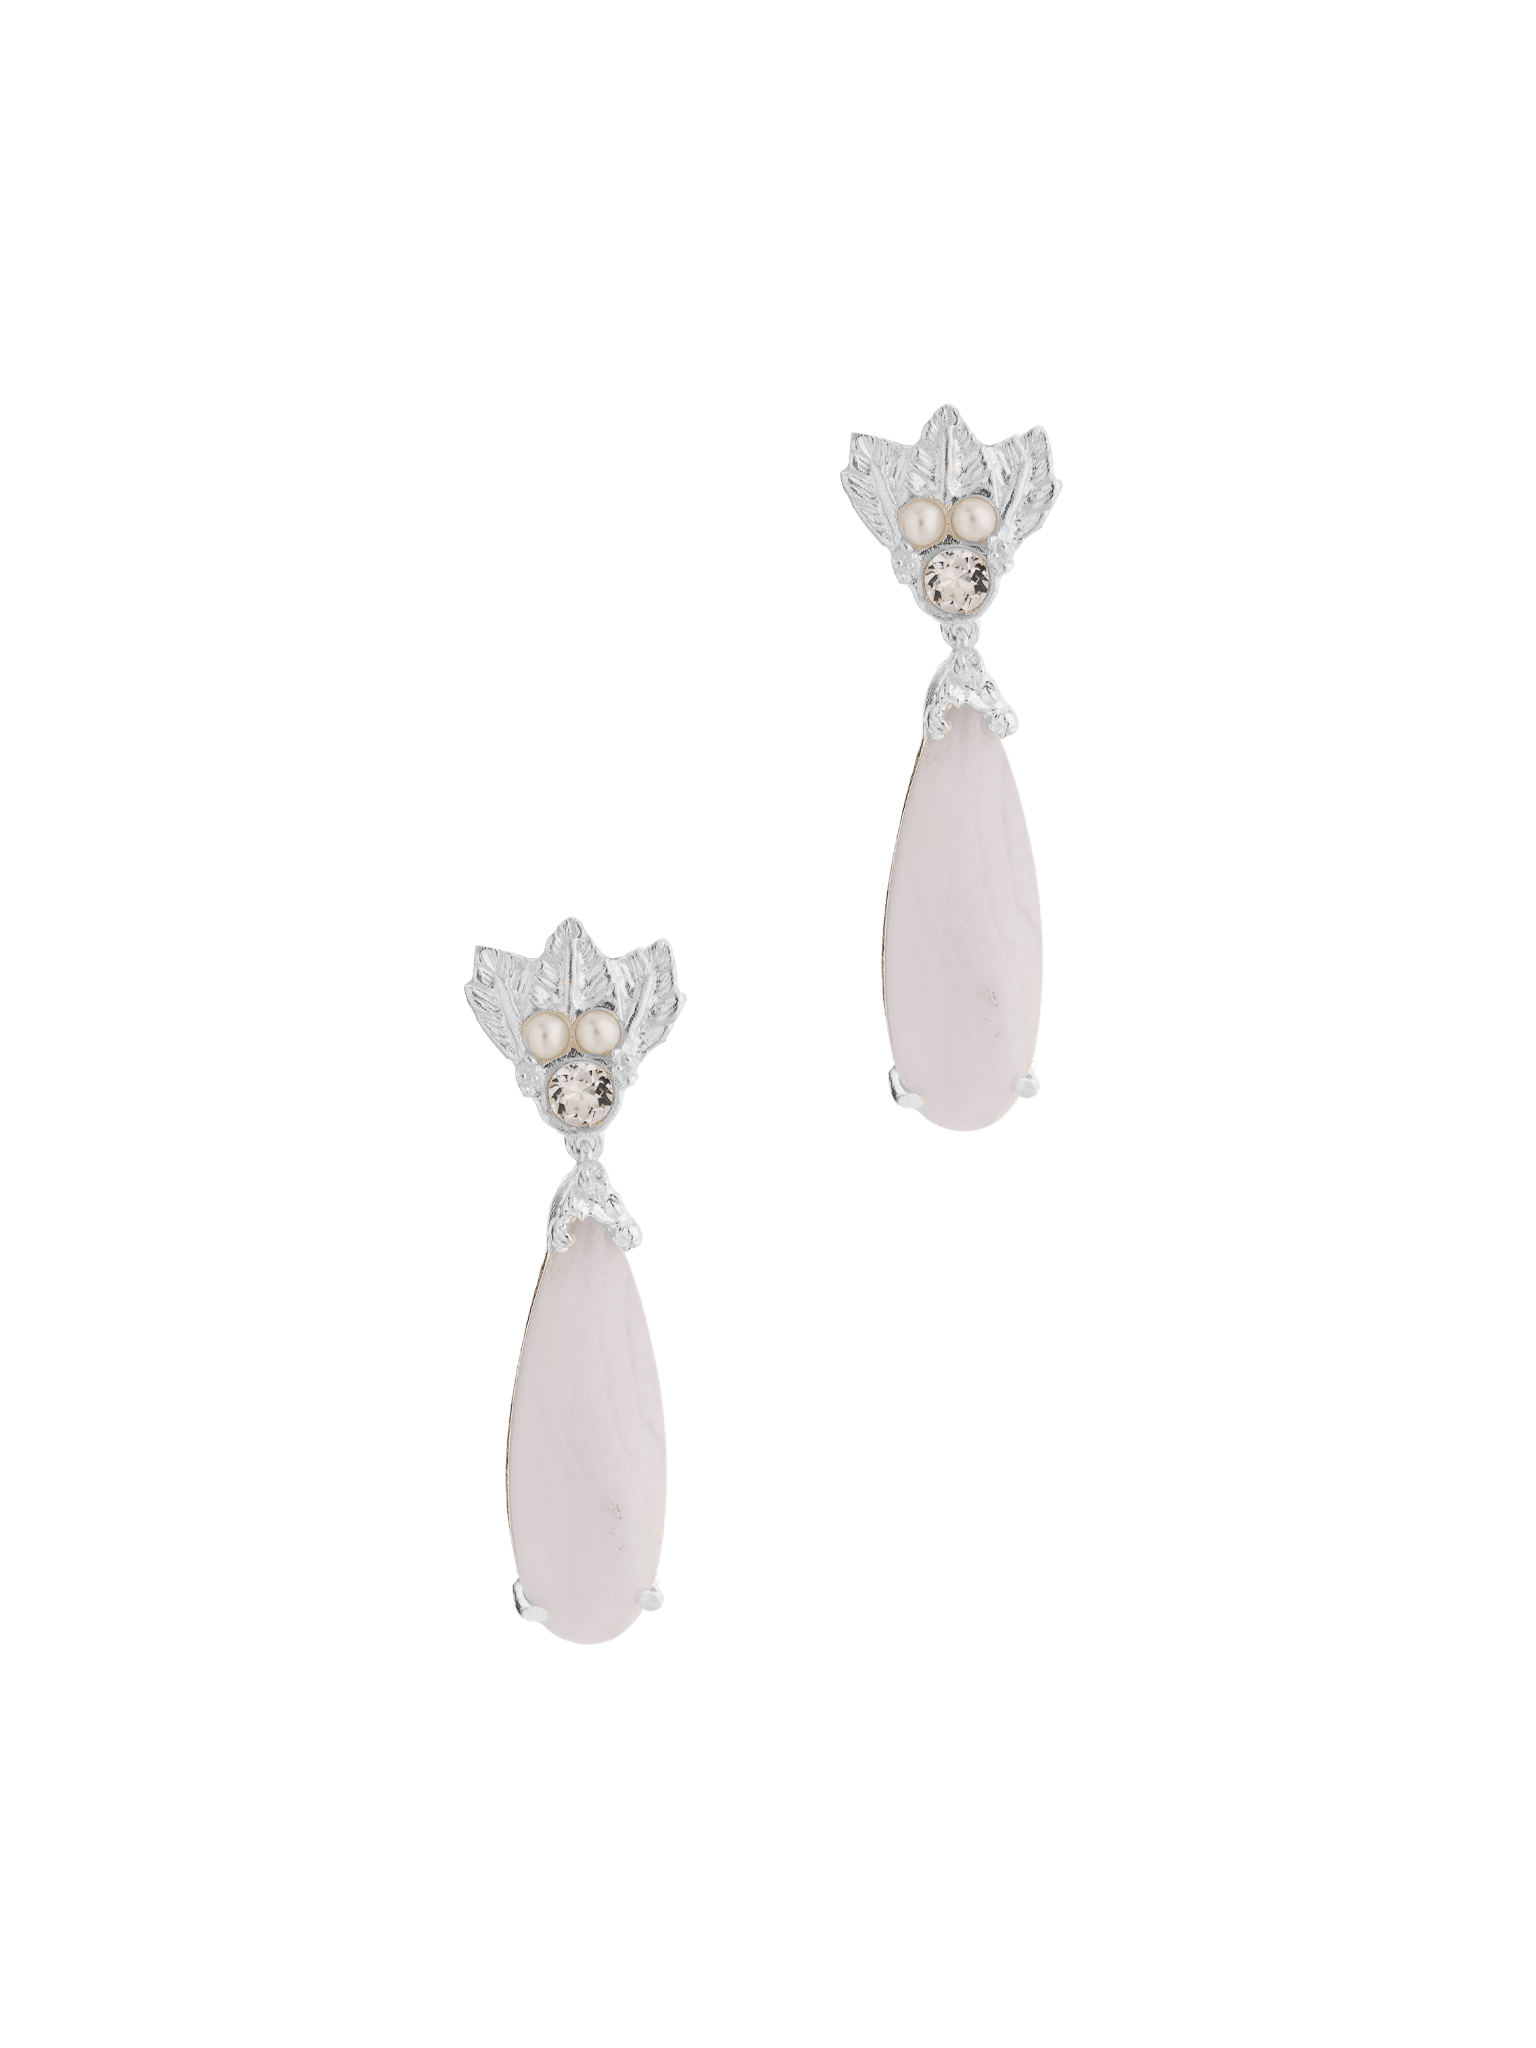 A pair of The Muse III Chalcedony earrings with a pink stone and crystals, crafted with .925 silver by Cremilde Bispo Jeweller